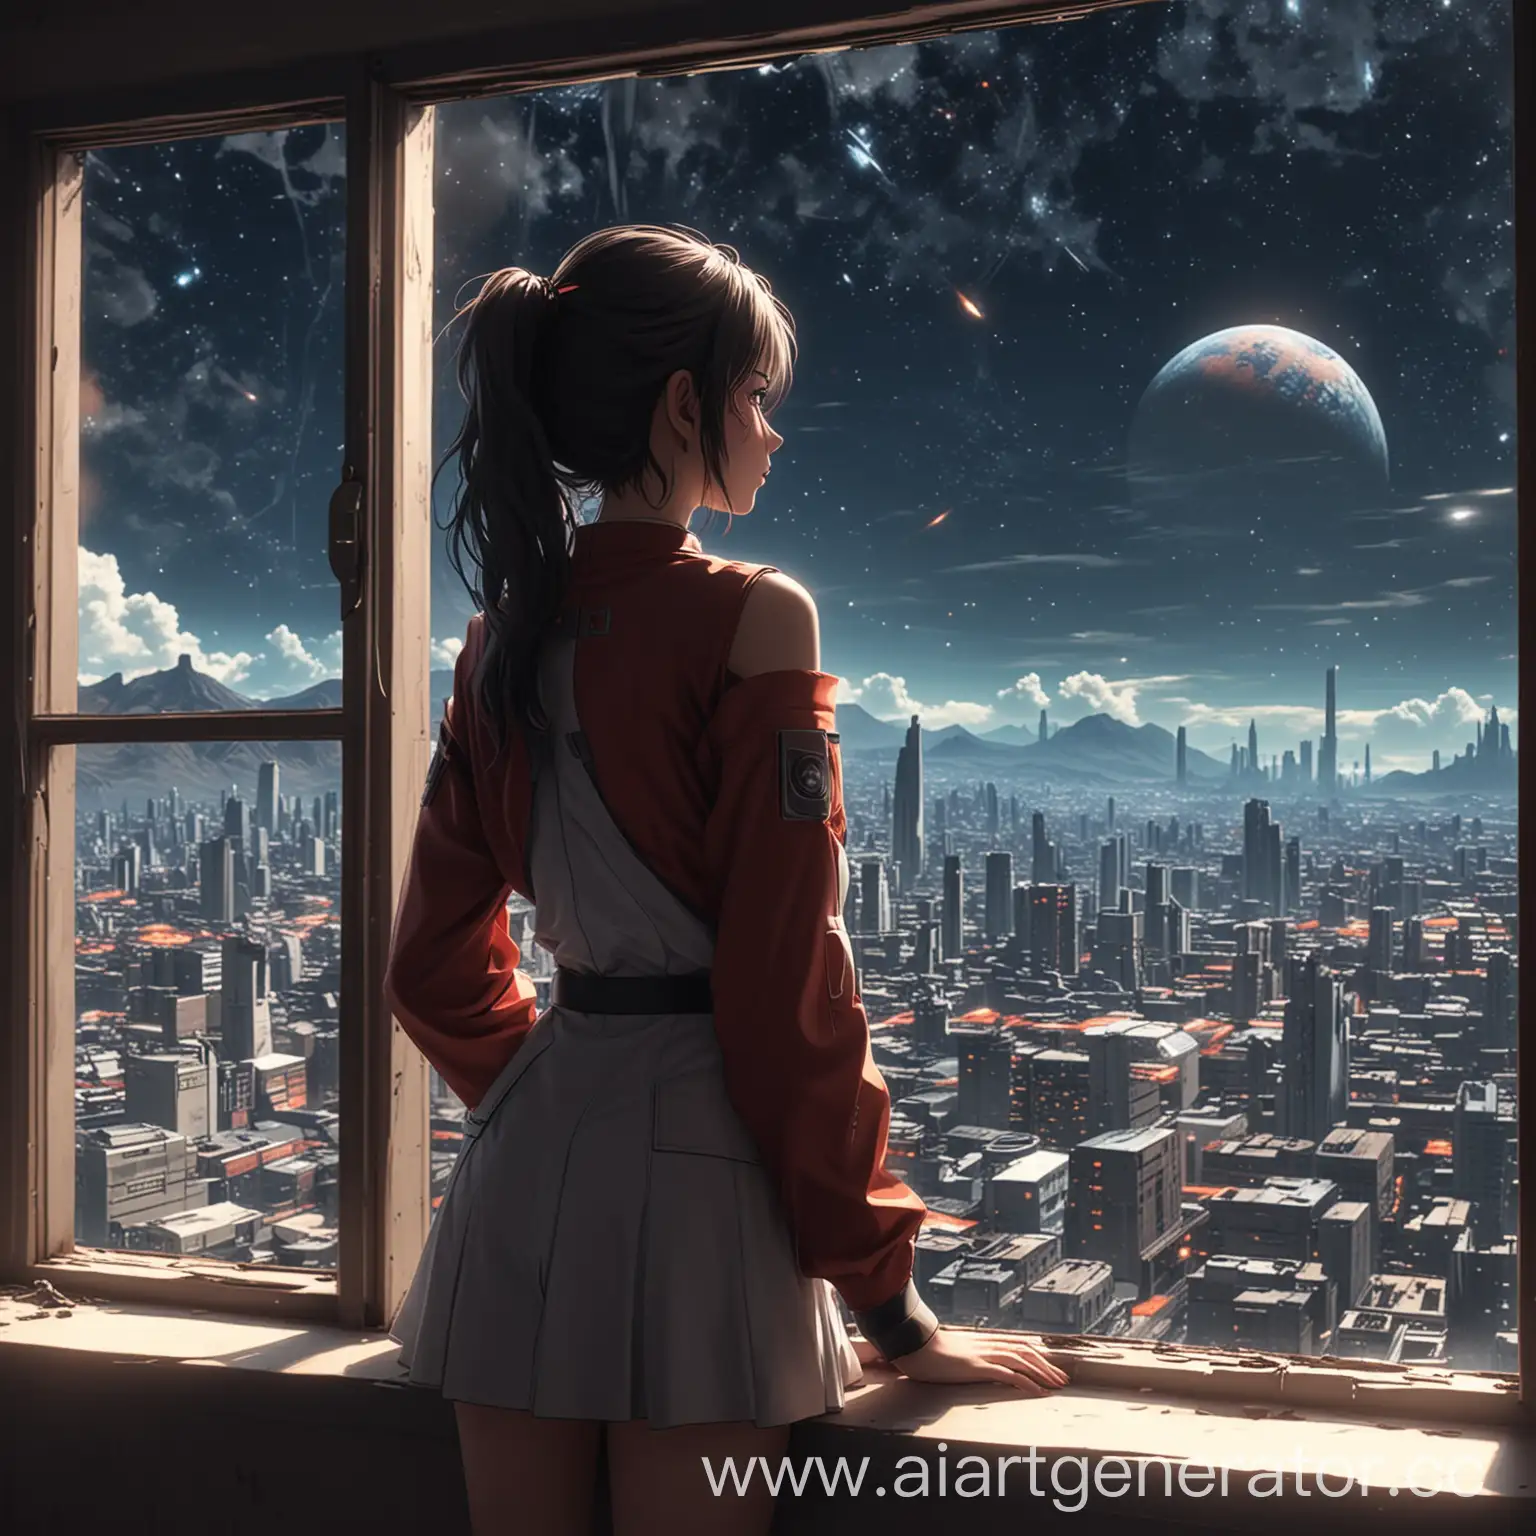 Anime-Girl-Waiting-for-Lover-with-Future-City-View-in-4K